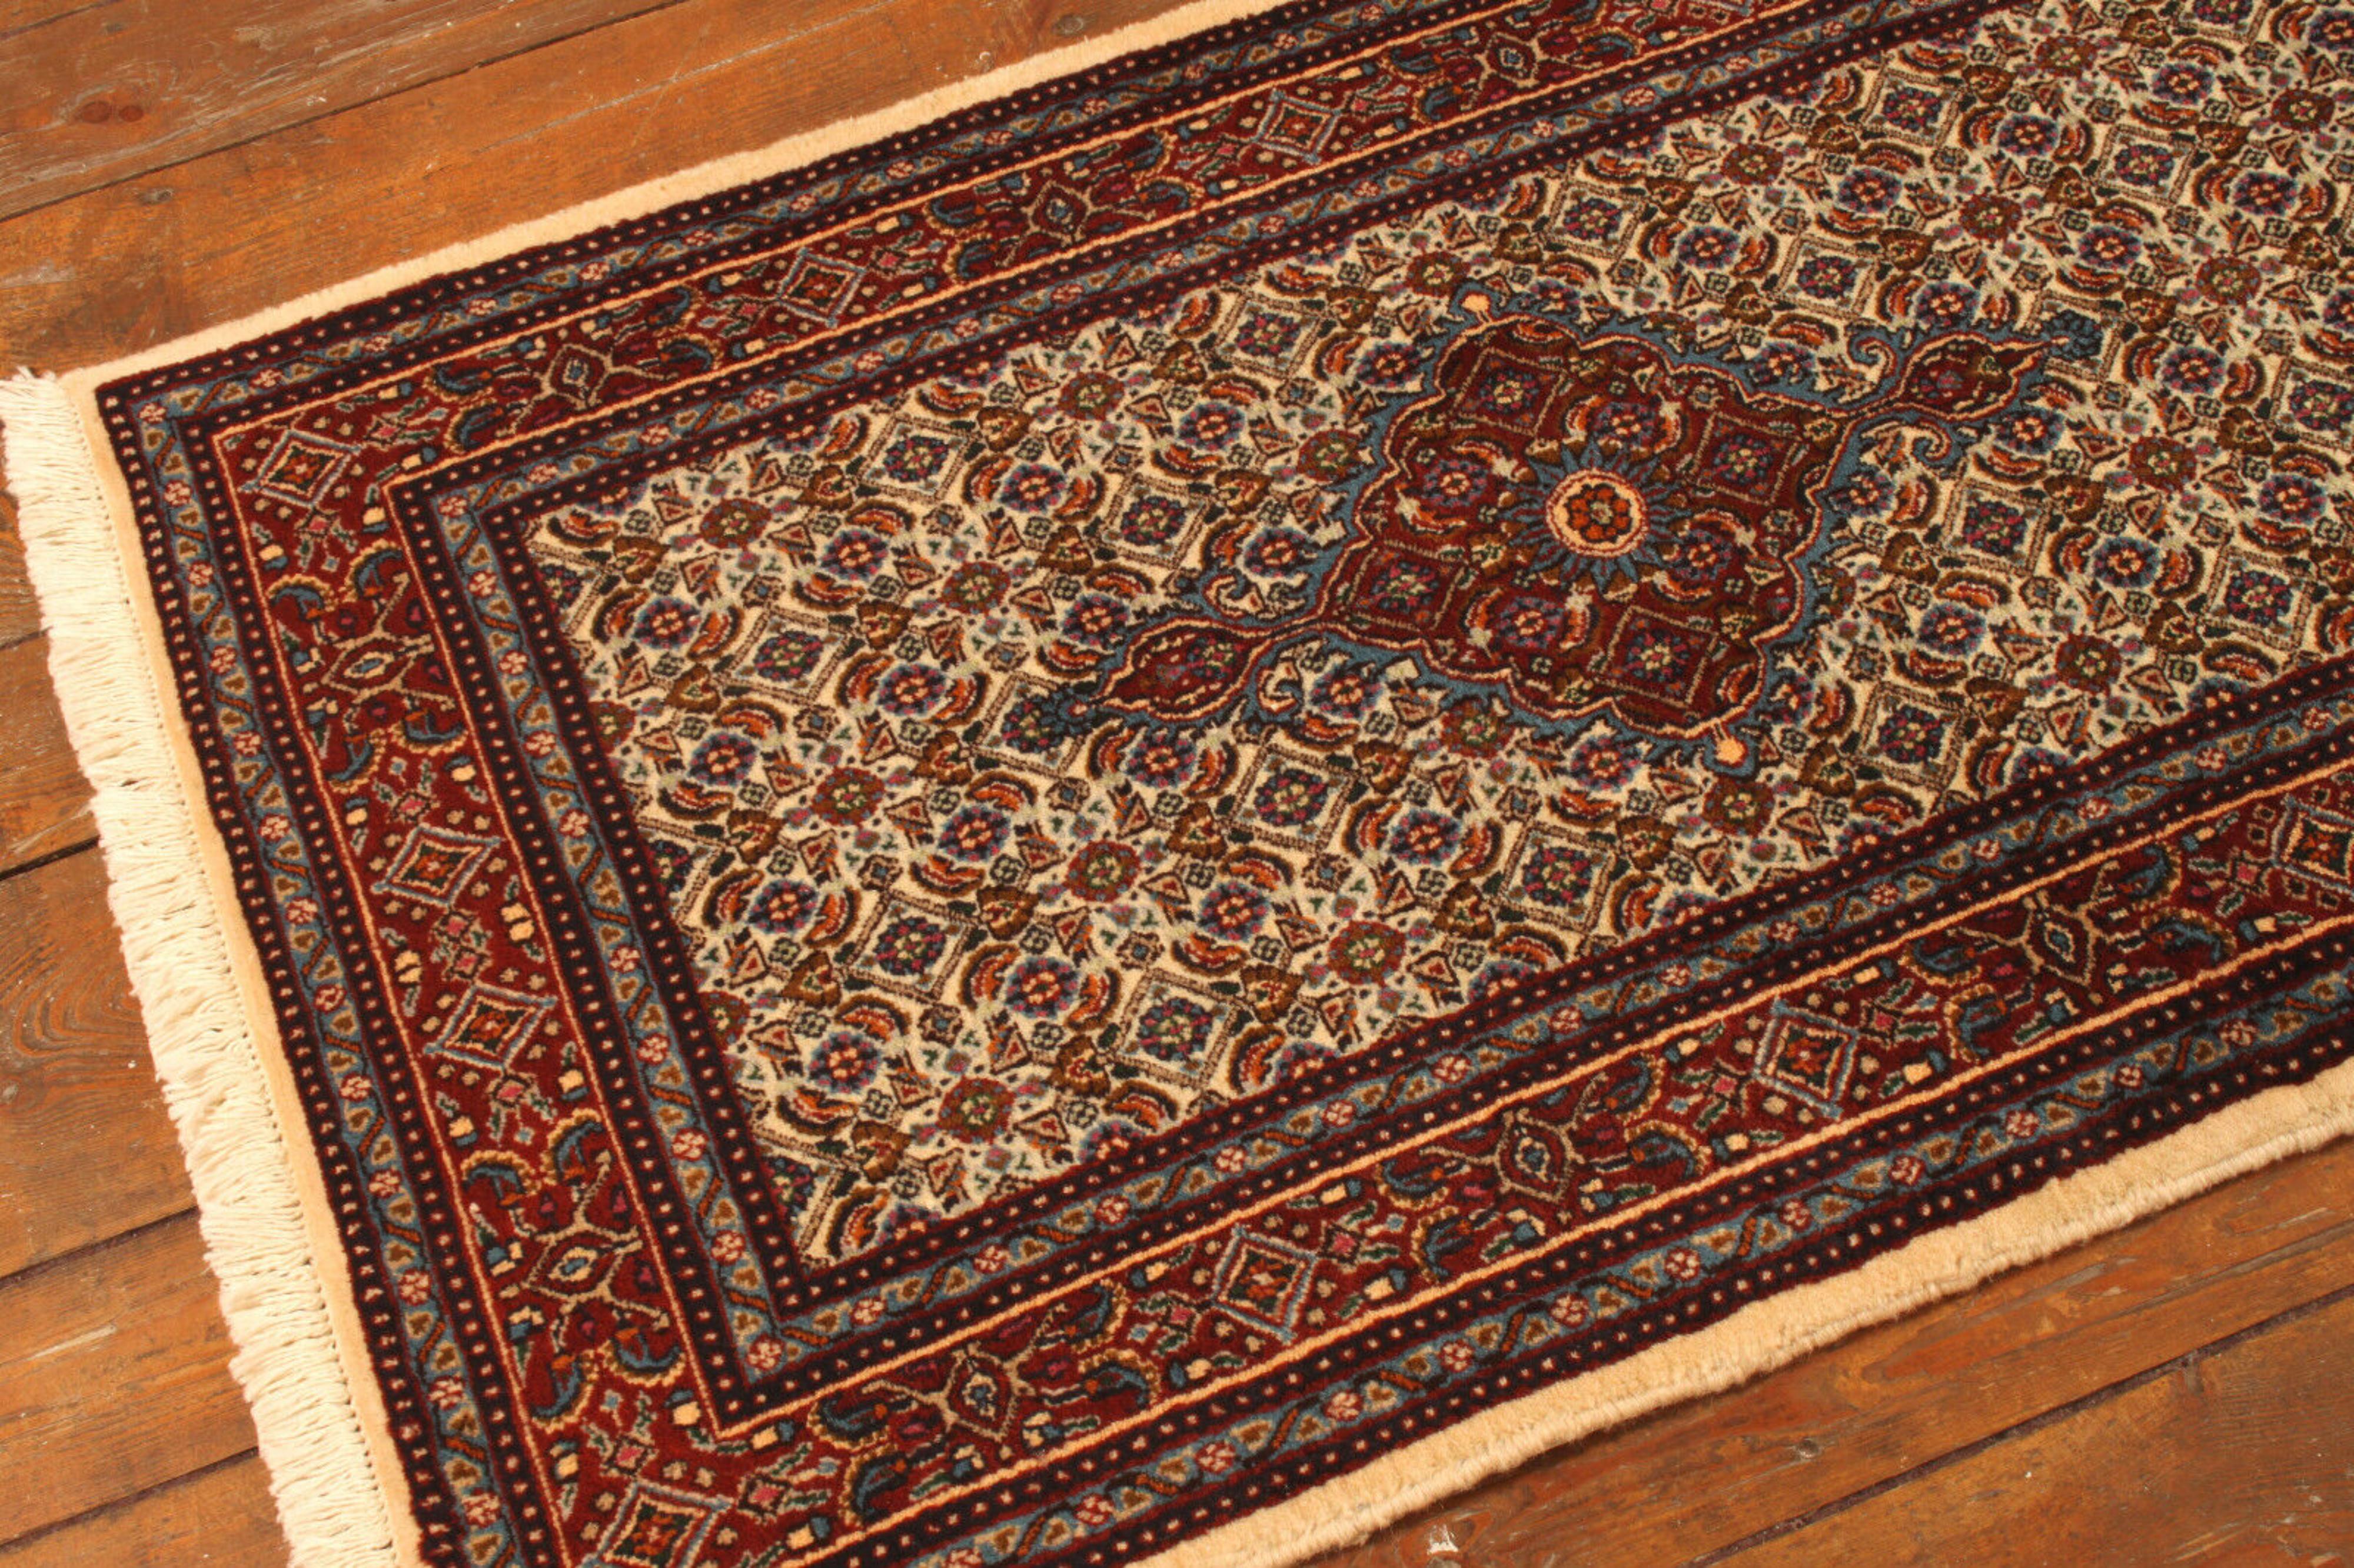 Handmade Vintage Persian Style Moud Runner Rug 2.6' x 9.6', 1980s - 1T51 For Sale 1